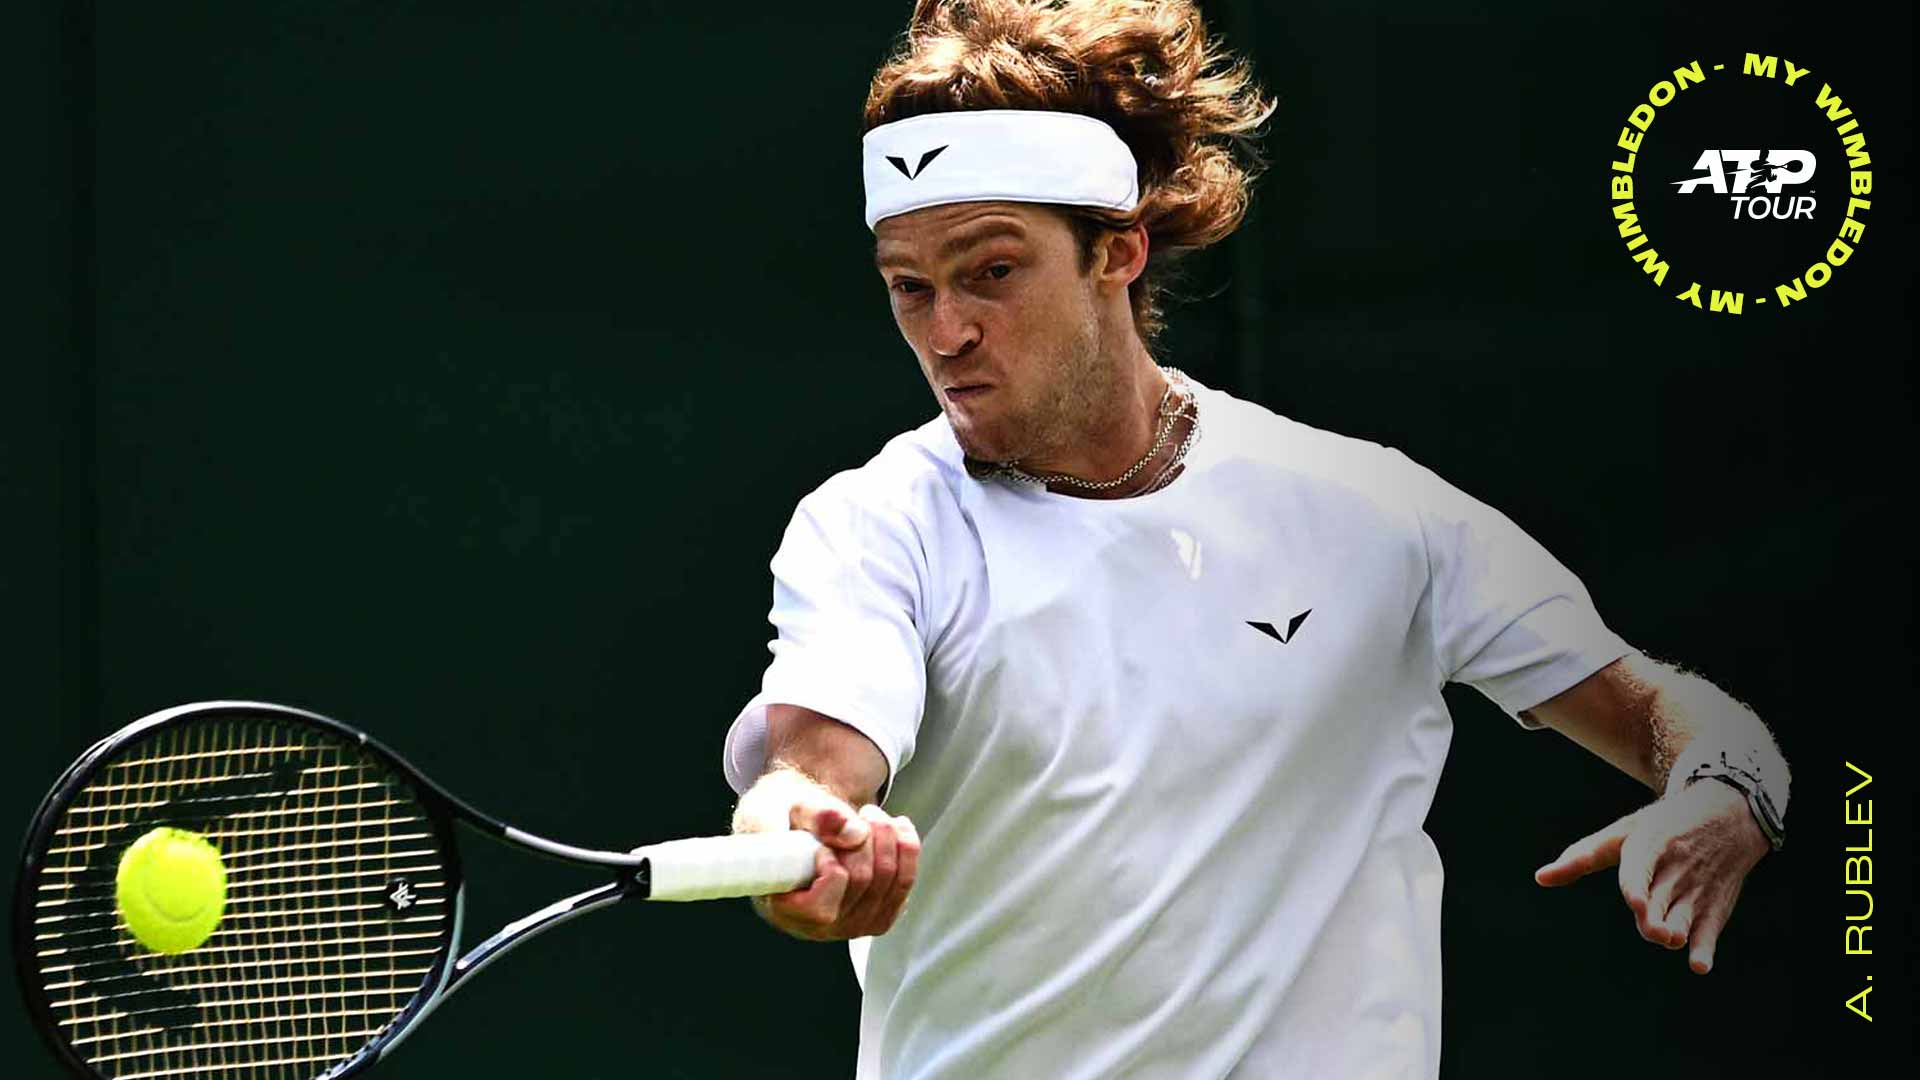 Andrey Rublev is seeded sixth at Wimbledon.